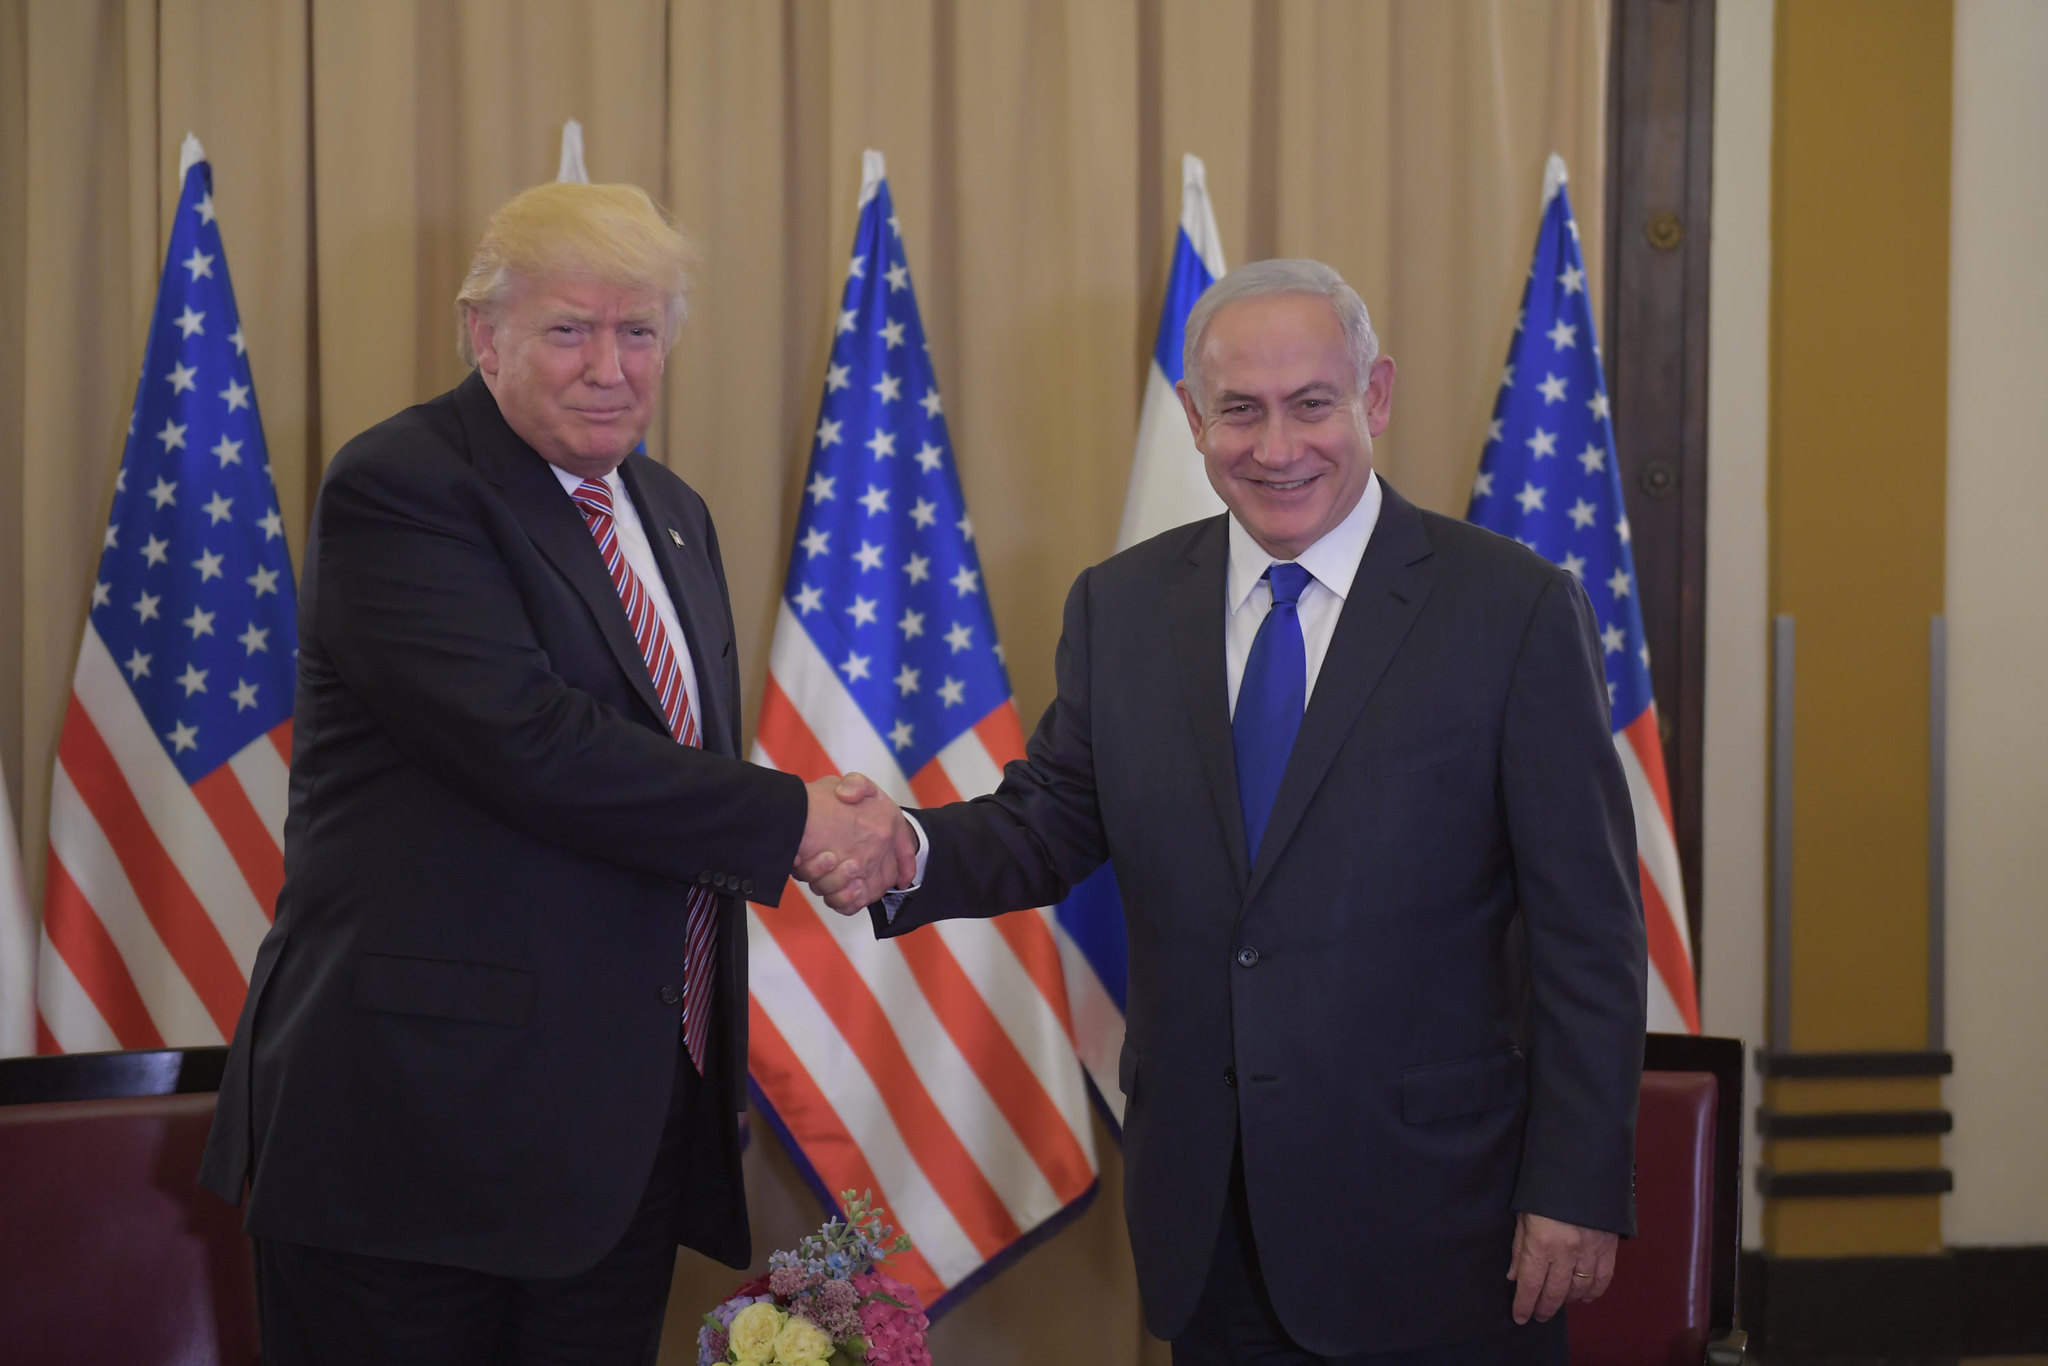 Trump Netenyahu Image Flickr Israeli Ministry of Foreign Affairs